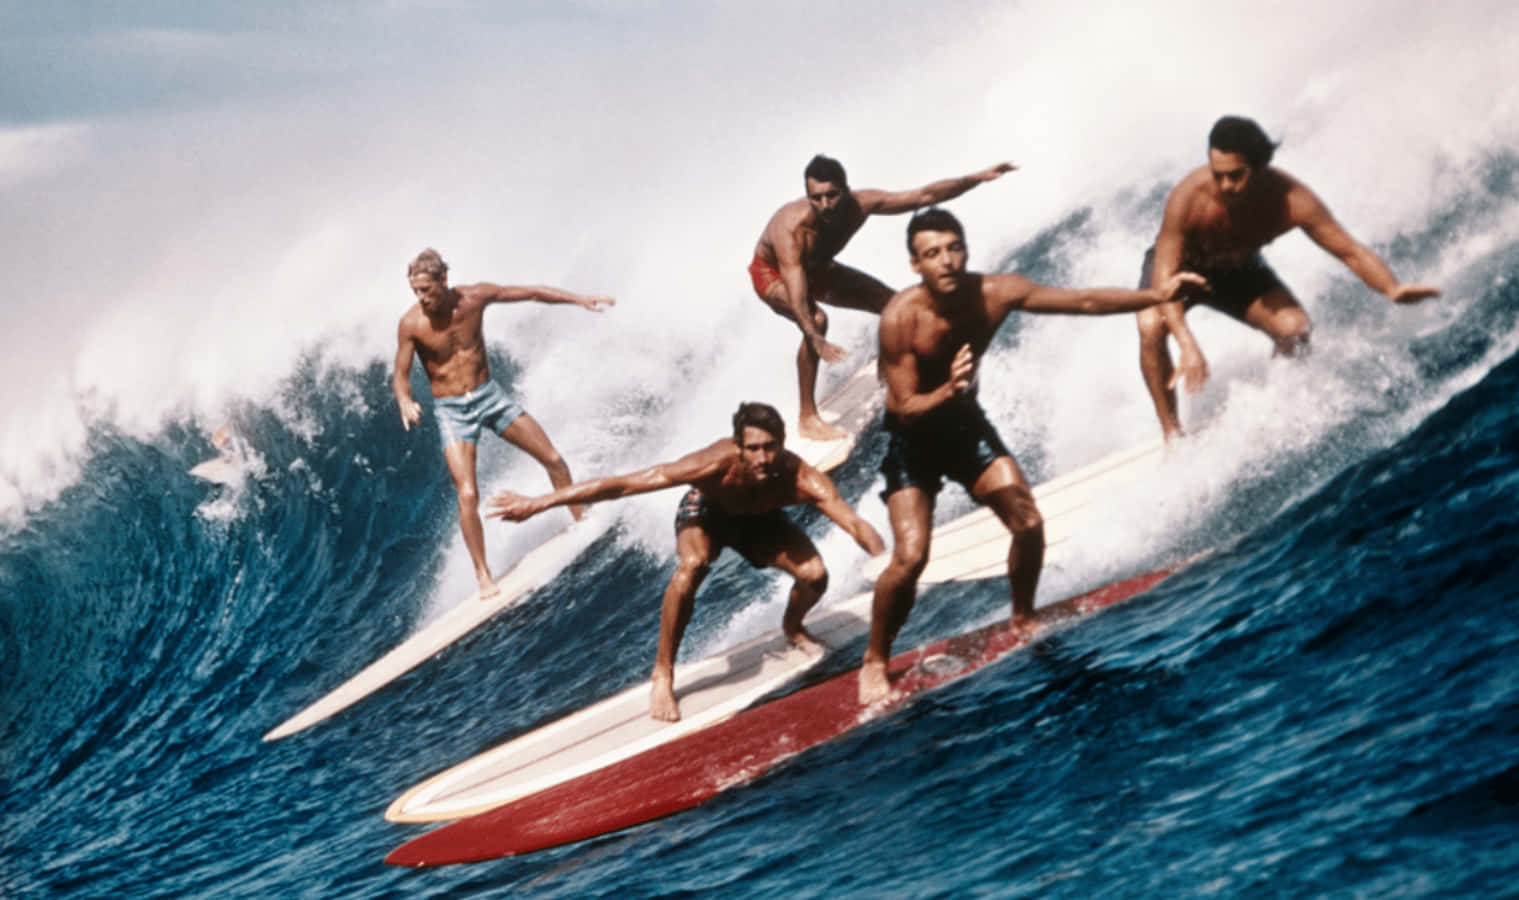 A Group Of Surfers Riding A Wave On Surfboards Wallpaper